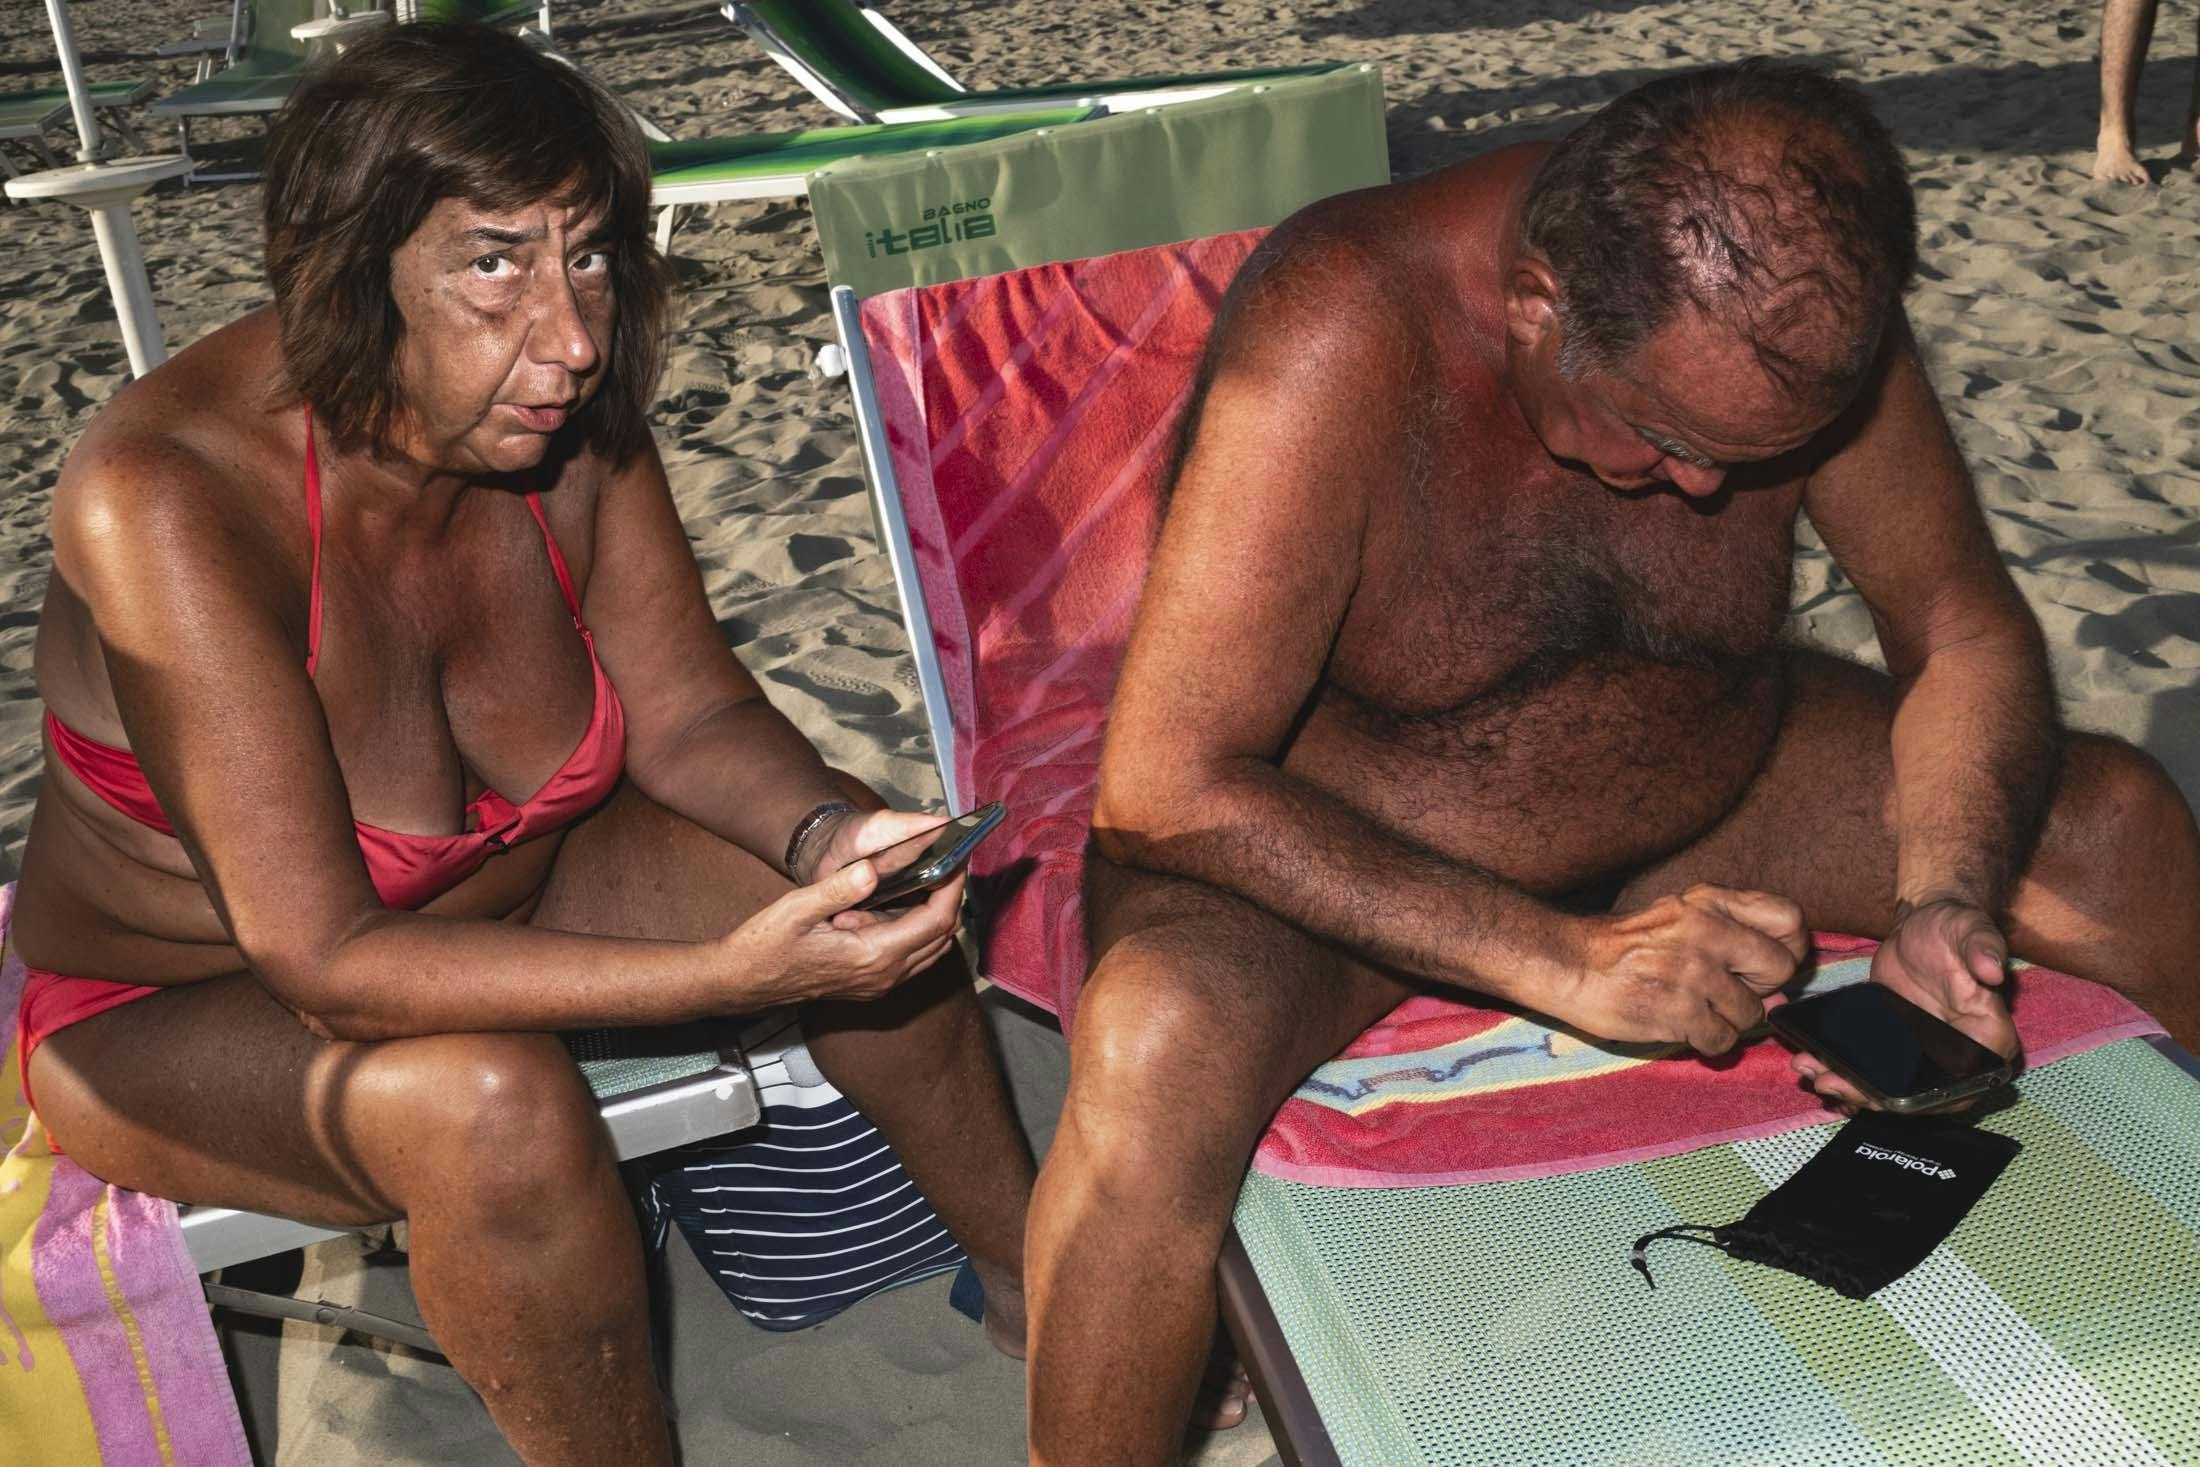 woman and man on sun loungers using phones